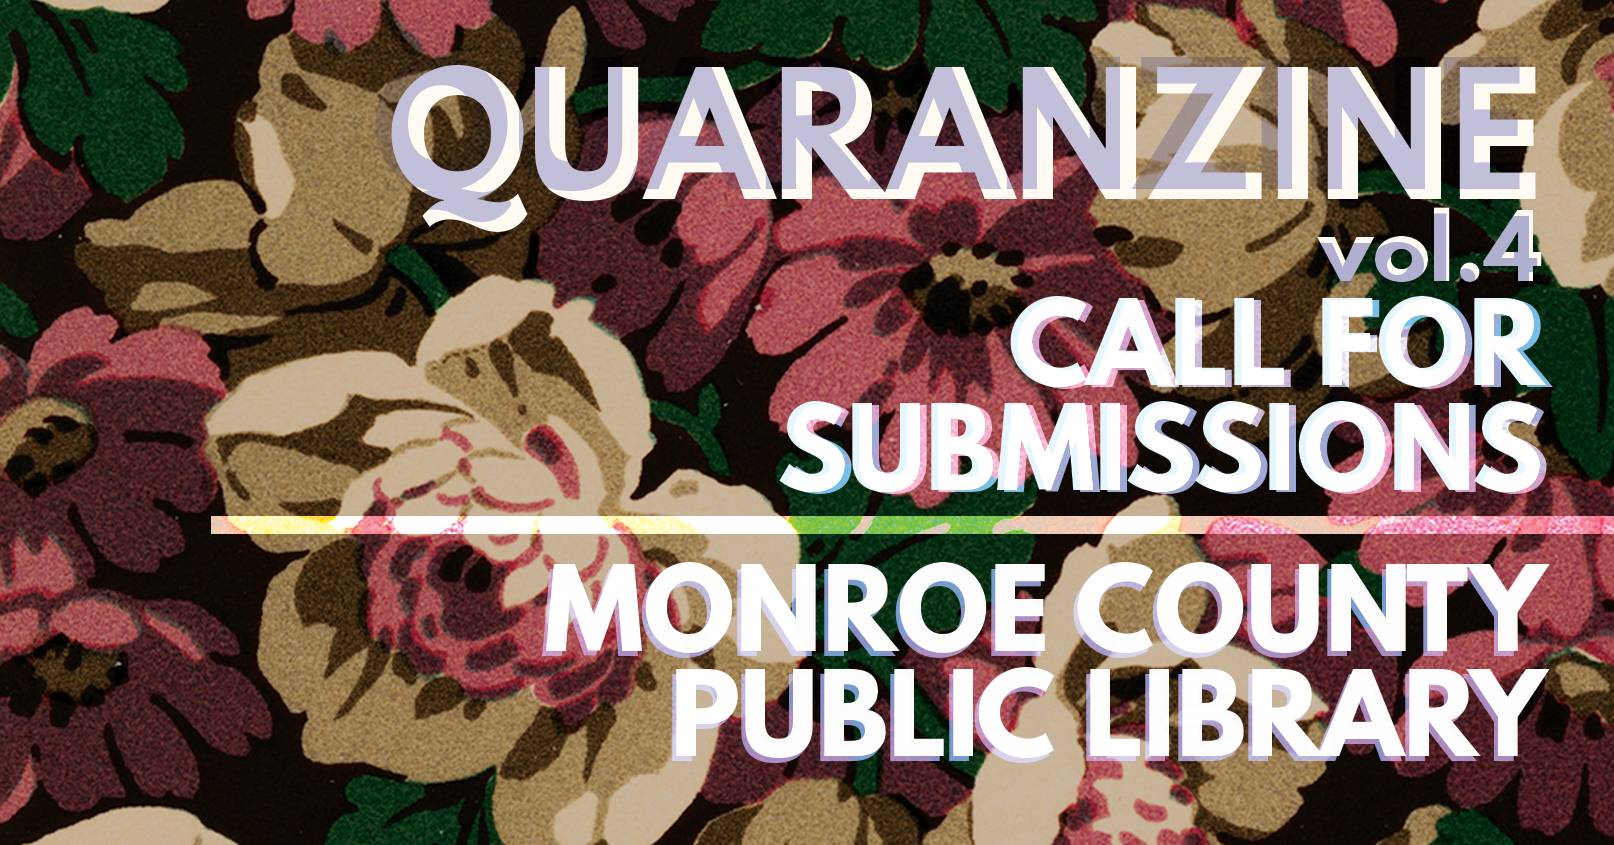 call_for_submissions_vol_4_facebook.png